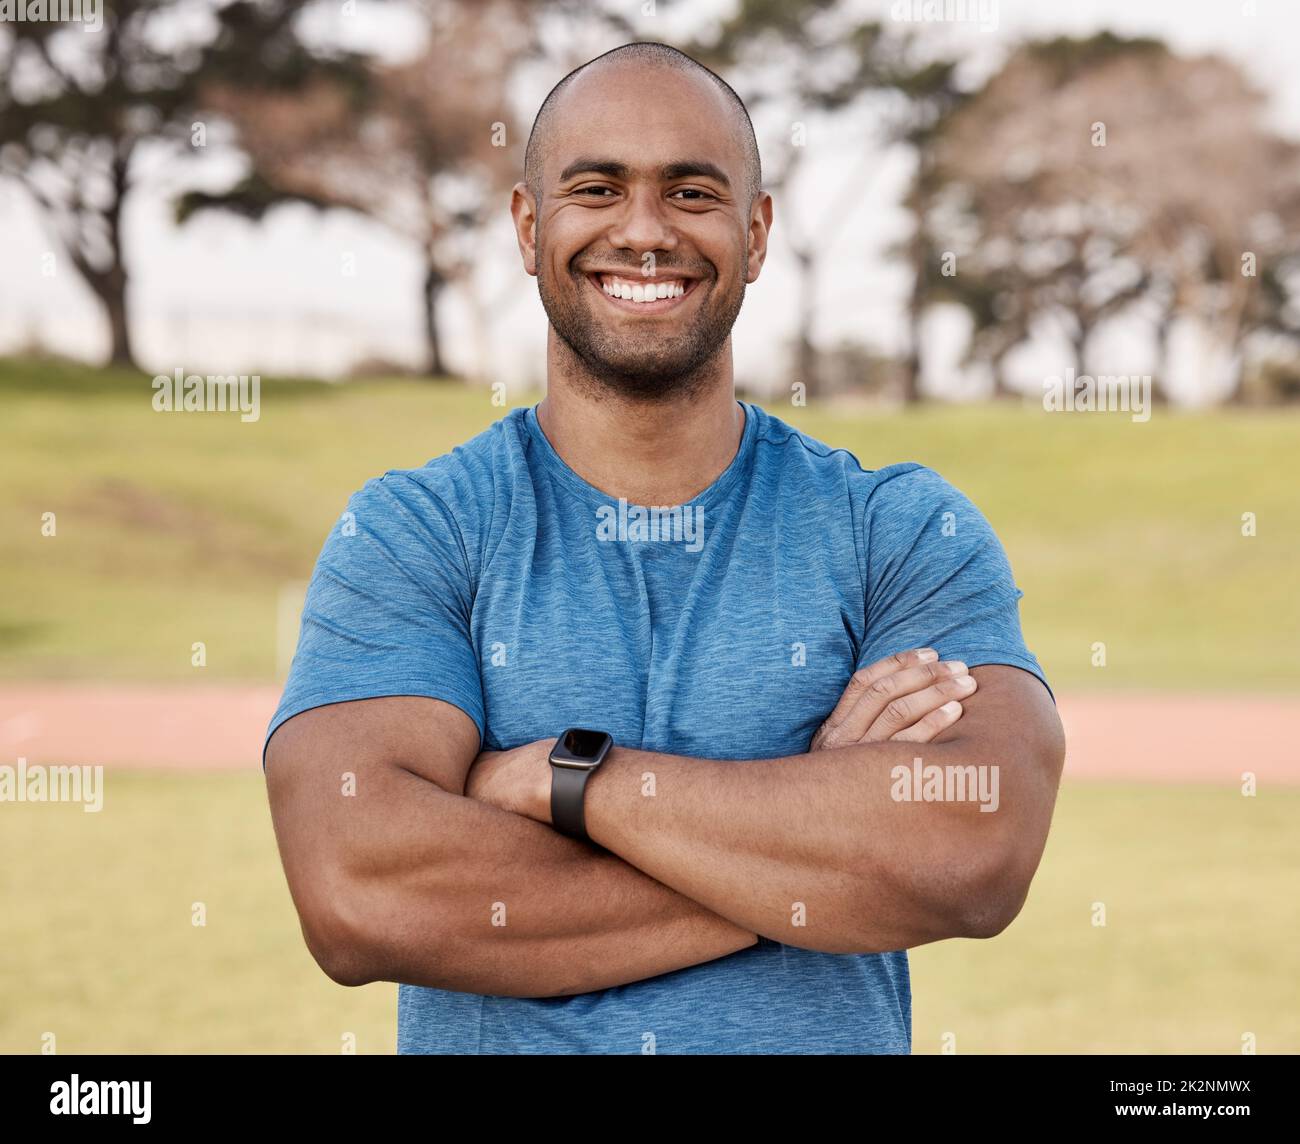 Staying fit is a lifestyle I choose. Shot of a handsome young man standing alone outside with his arms folded before playing sports. Stock Photo